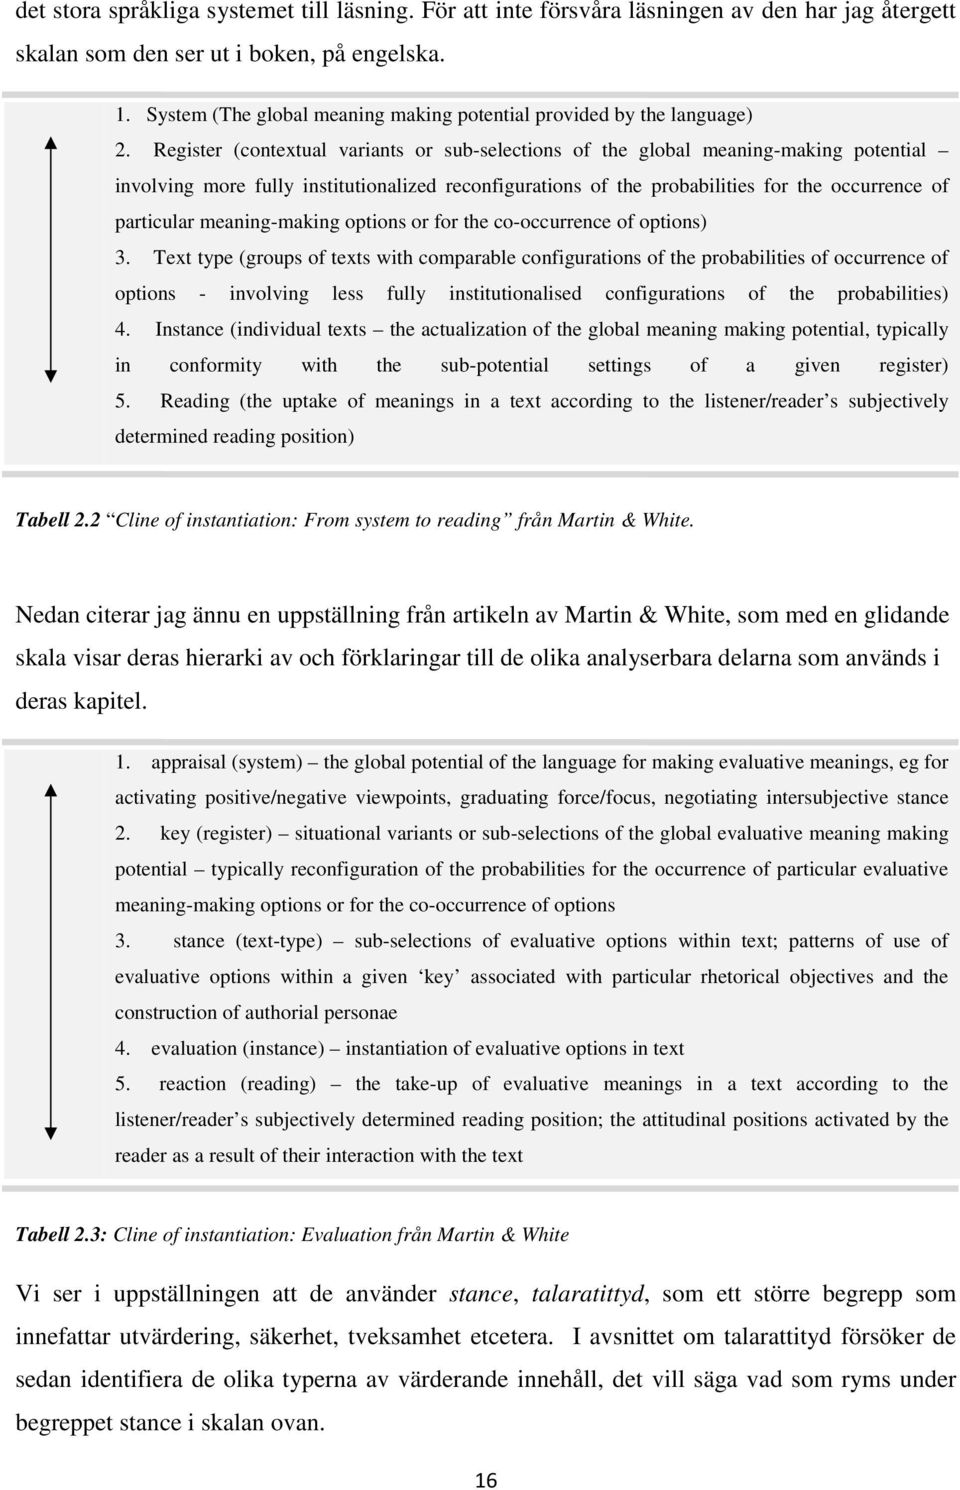 Register (contextual variants or sub-selections of the global meaning-making potential involving more fully institutionalized reconfigurations of the probabilities for the occurrence of particular